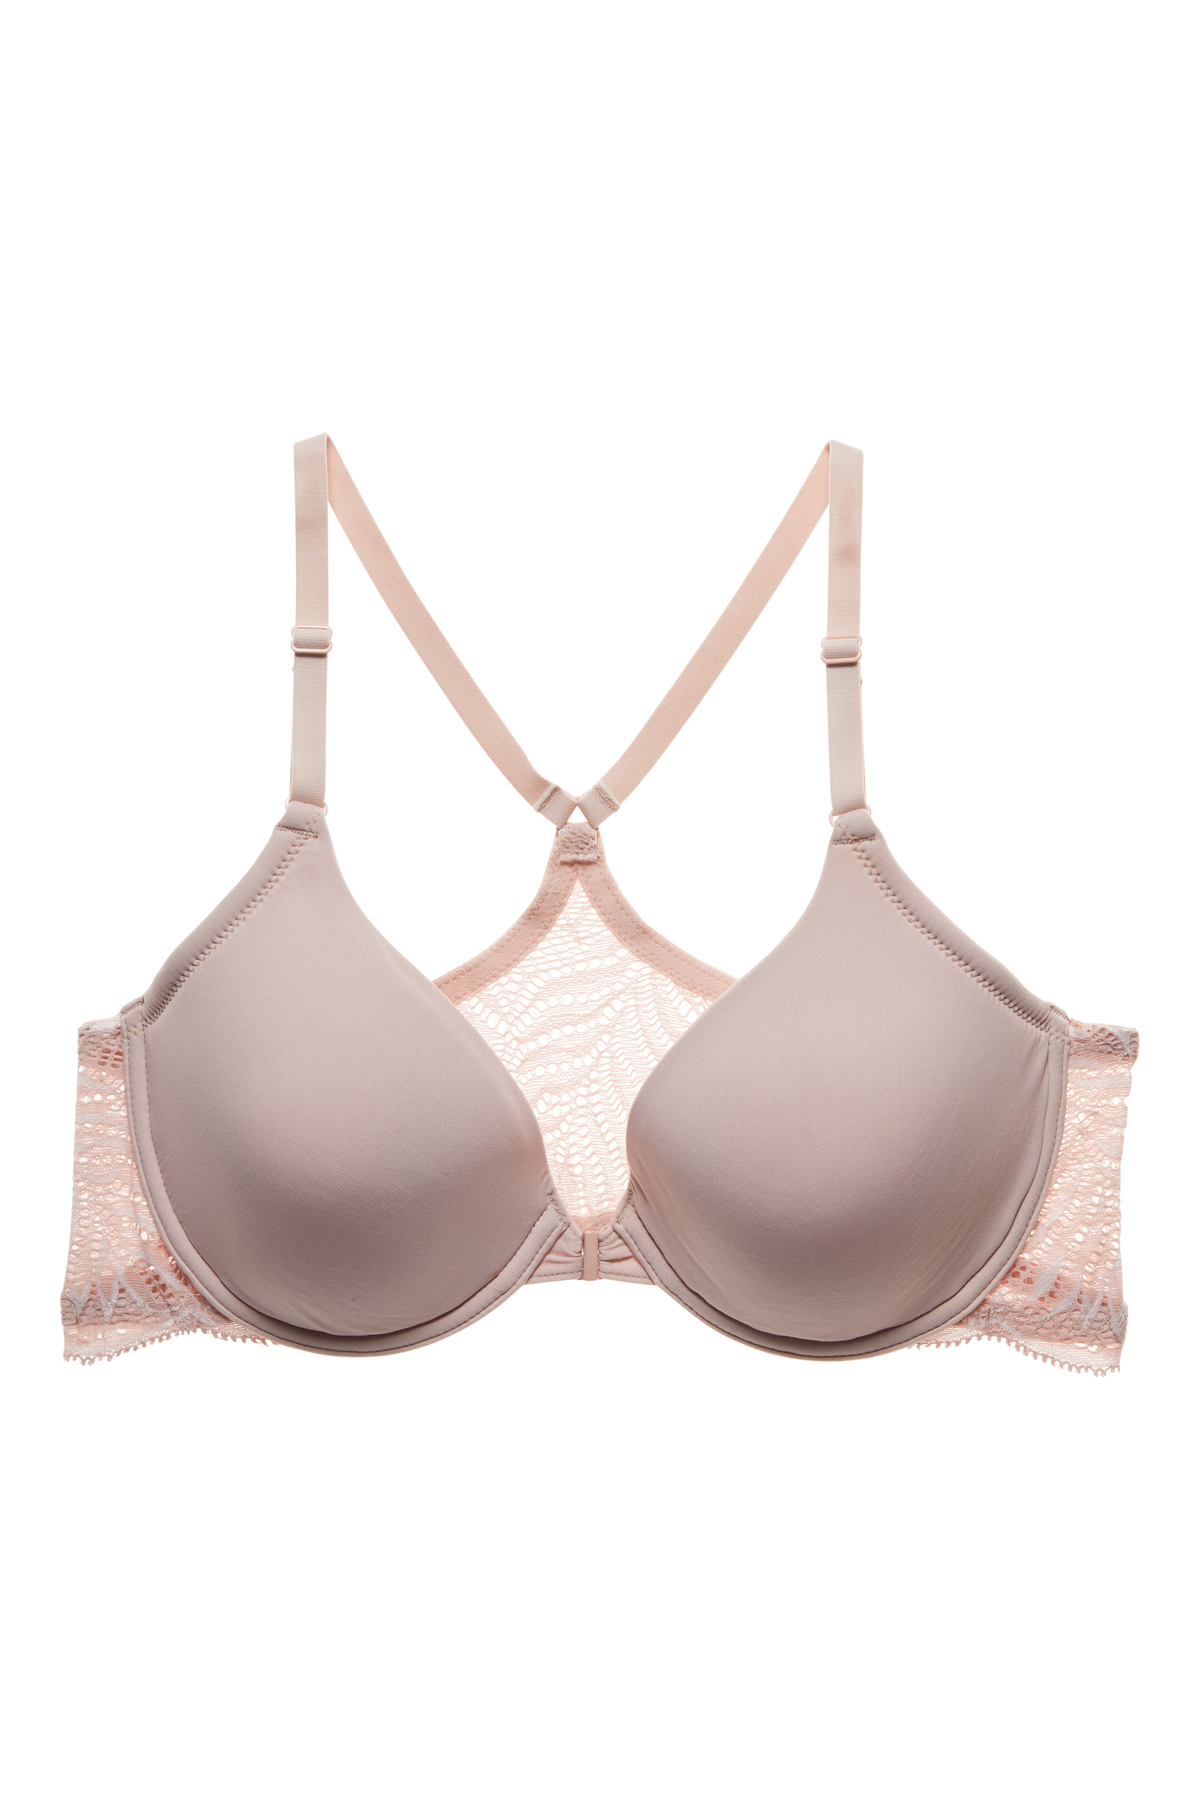 Buy Victoria's Secret Push Up Bra, Full Coverage, Smoothing, Perfect Shape  Padding (34B-38DDD), Beige Smooth, 36B at